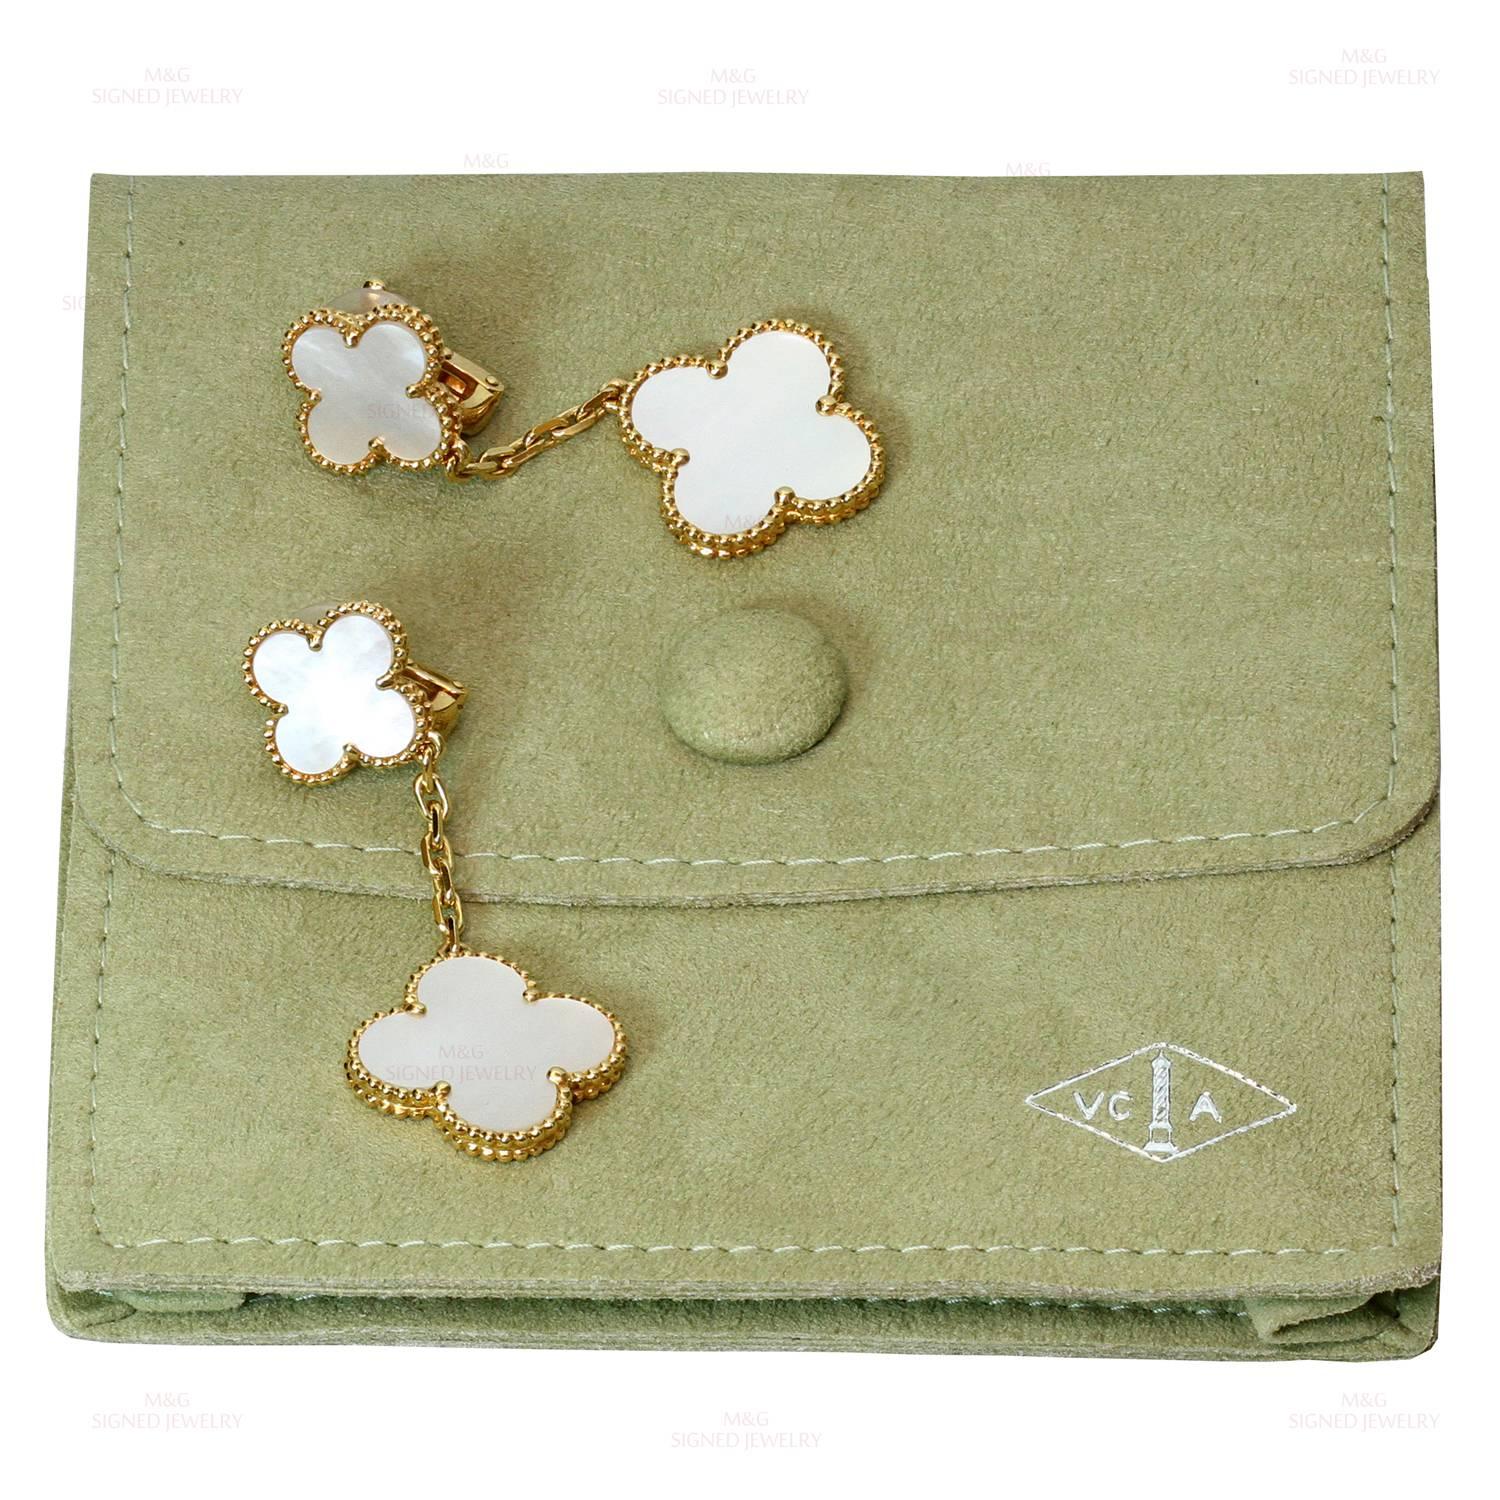 These elegant Van Cleef & Arpels drop earrings from the Magic Alhambra collection are crafted in 18k yellow gold and feature a pair of lucky clover motifs beautifully inlaid with mother-of-pearl in round bead settings. Measurements: 0.78